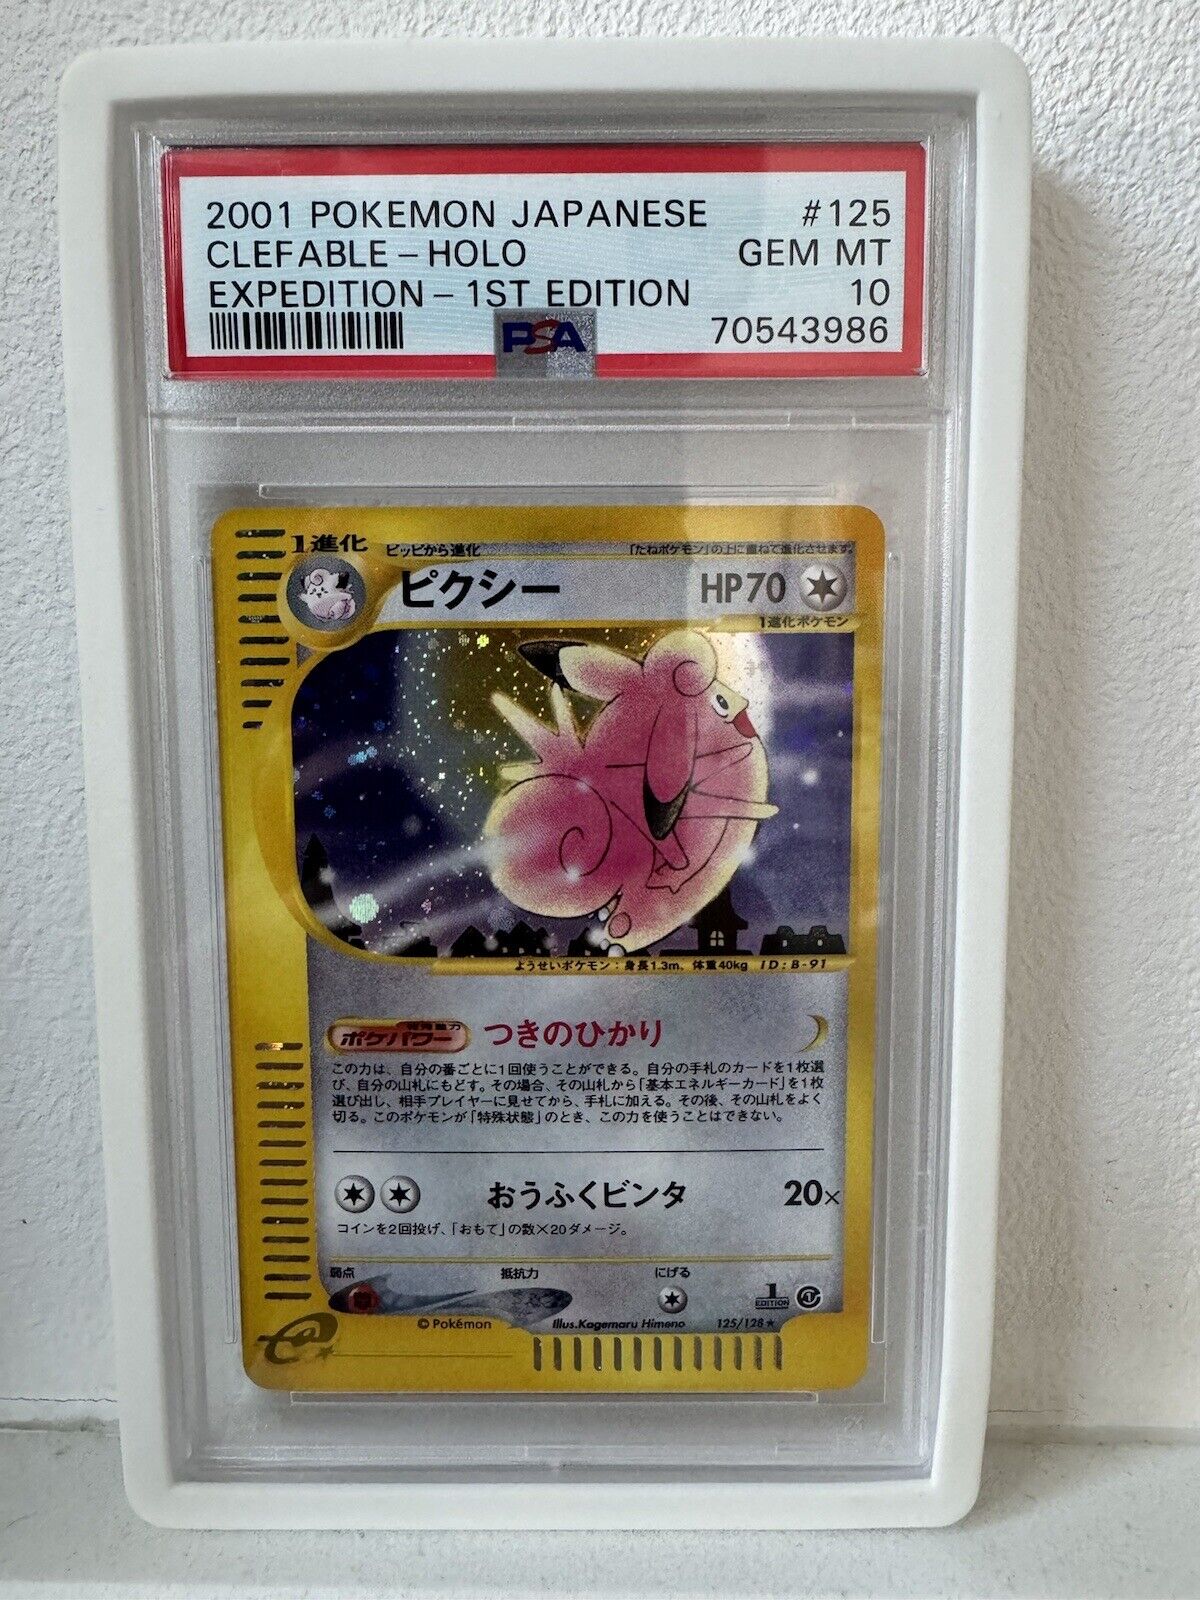 PSA 10 Clefable Holo 2001 Expedition 1st Edition 125/128 Pokemon Japanese Gem MT